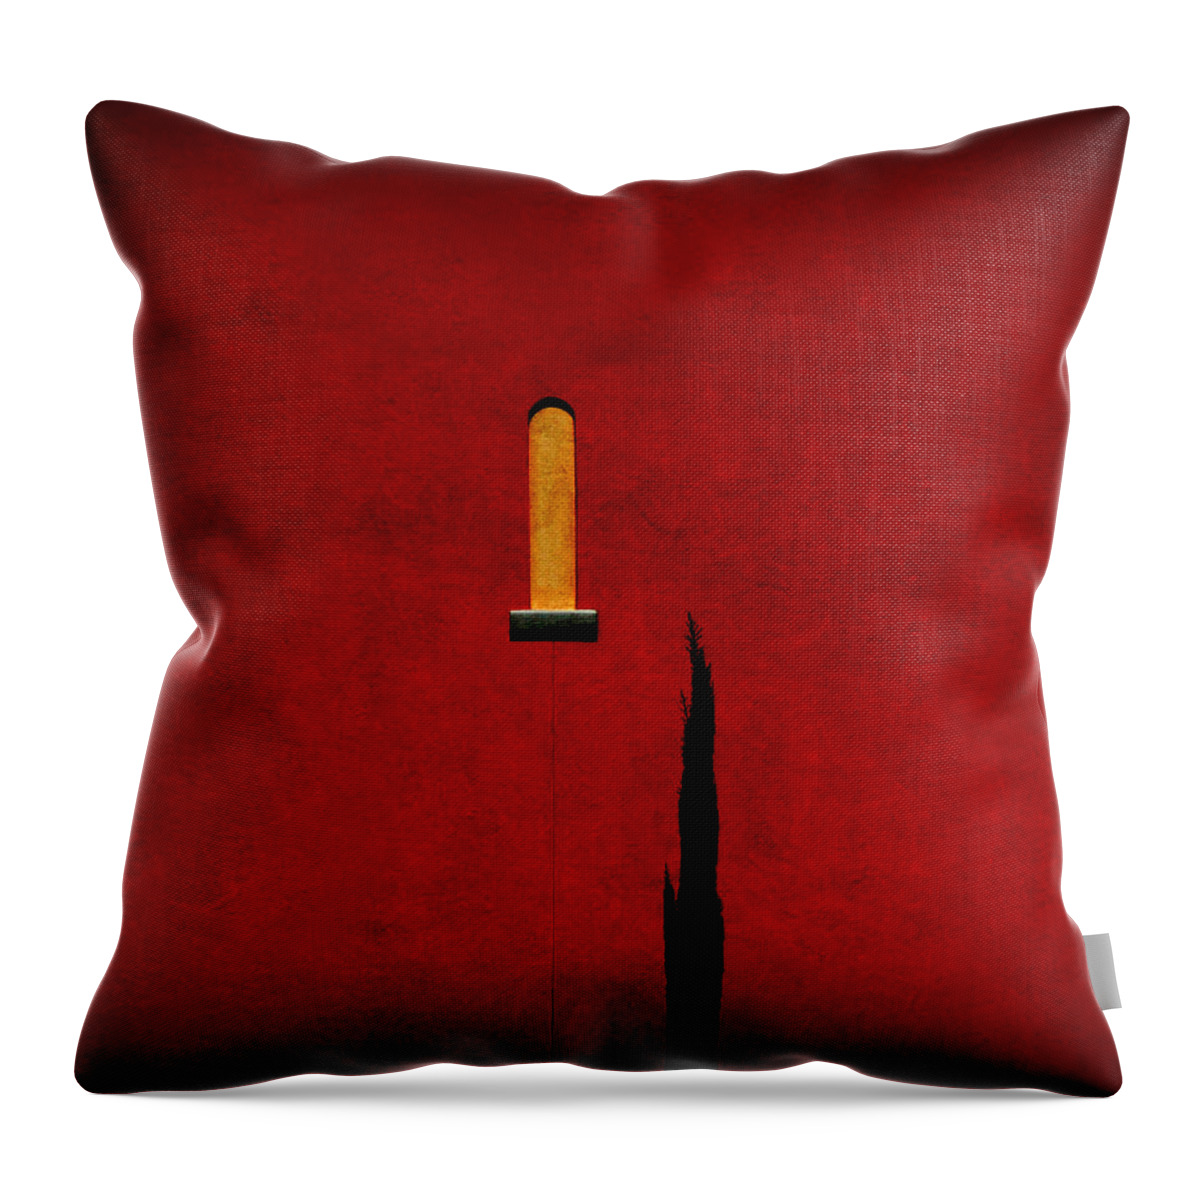 Art Throw Pillow featuring the photograph Metaphysical Art by Thomas Michael Photography